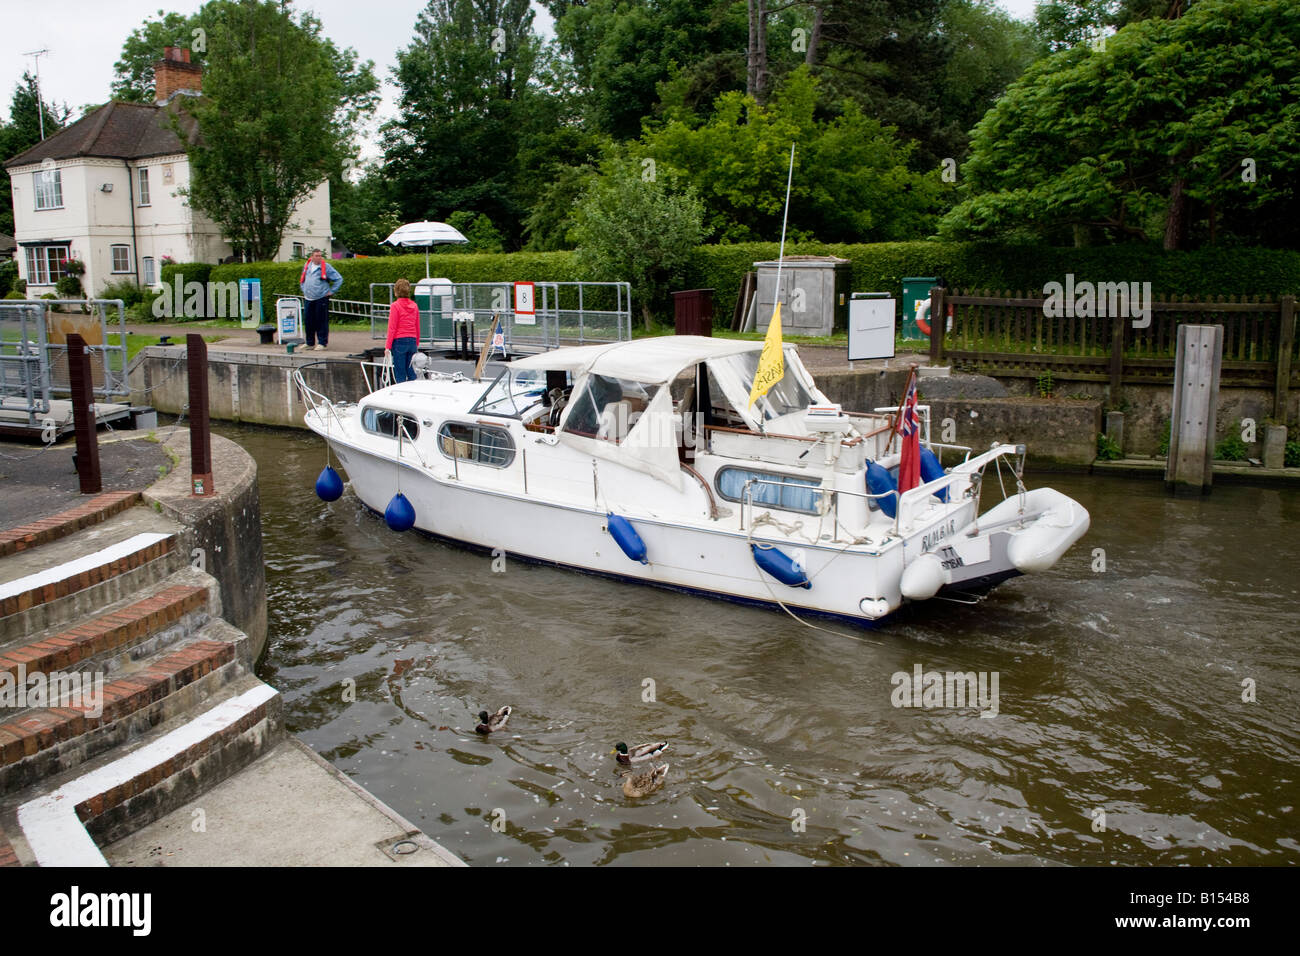 Summer barge boating canal england lock marlow weir lock holiday Stock Photo